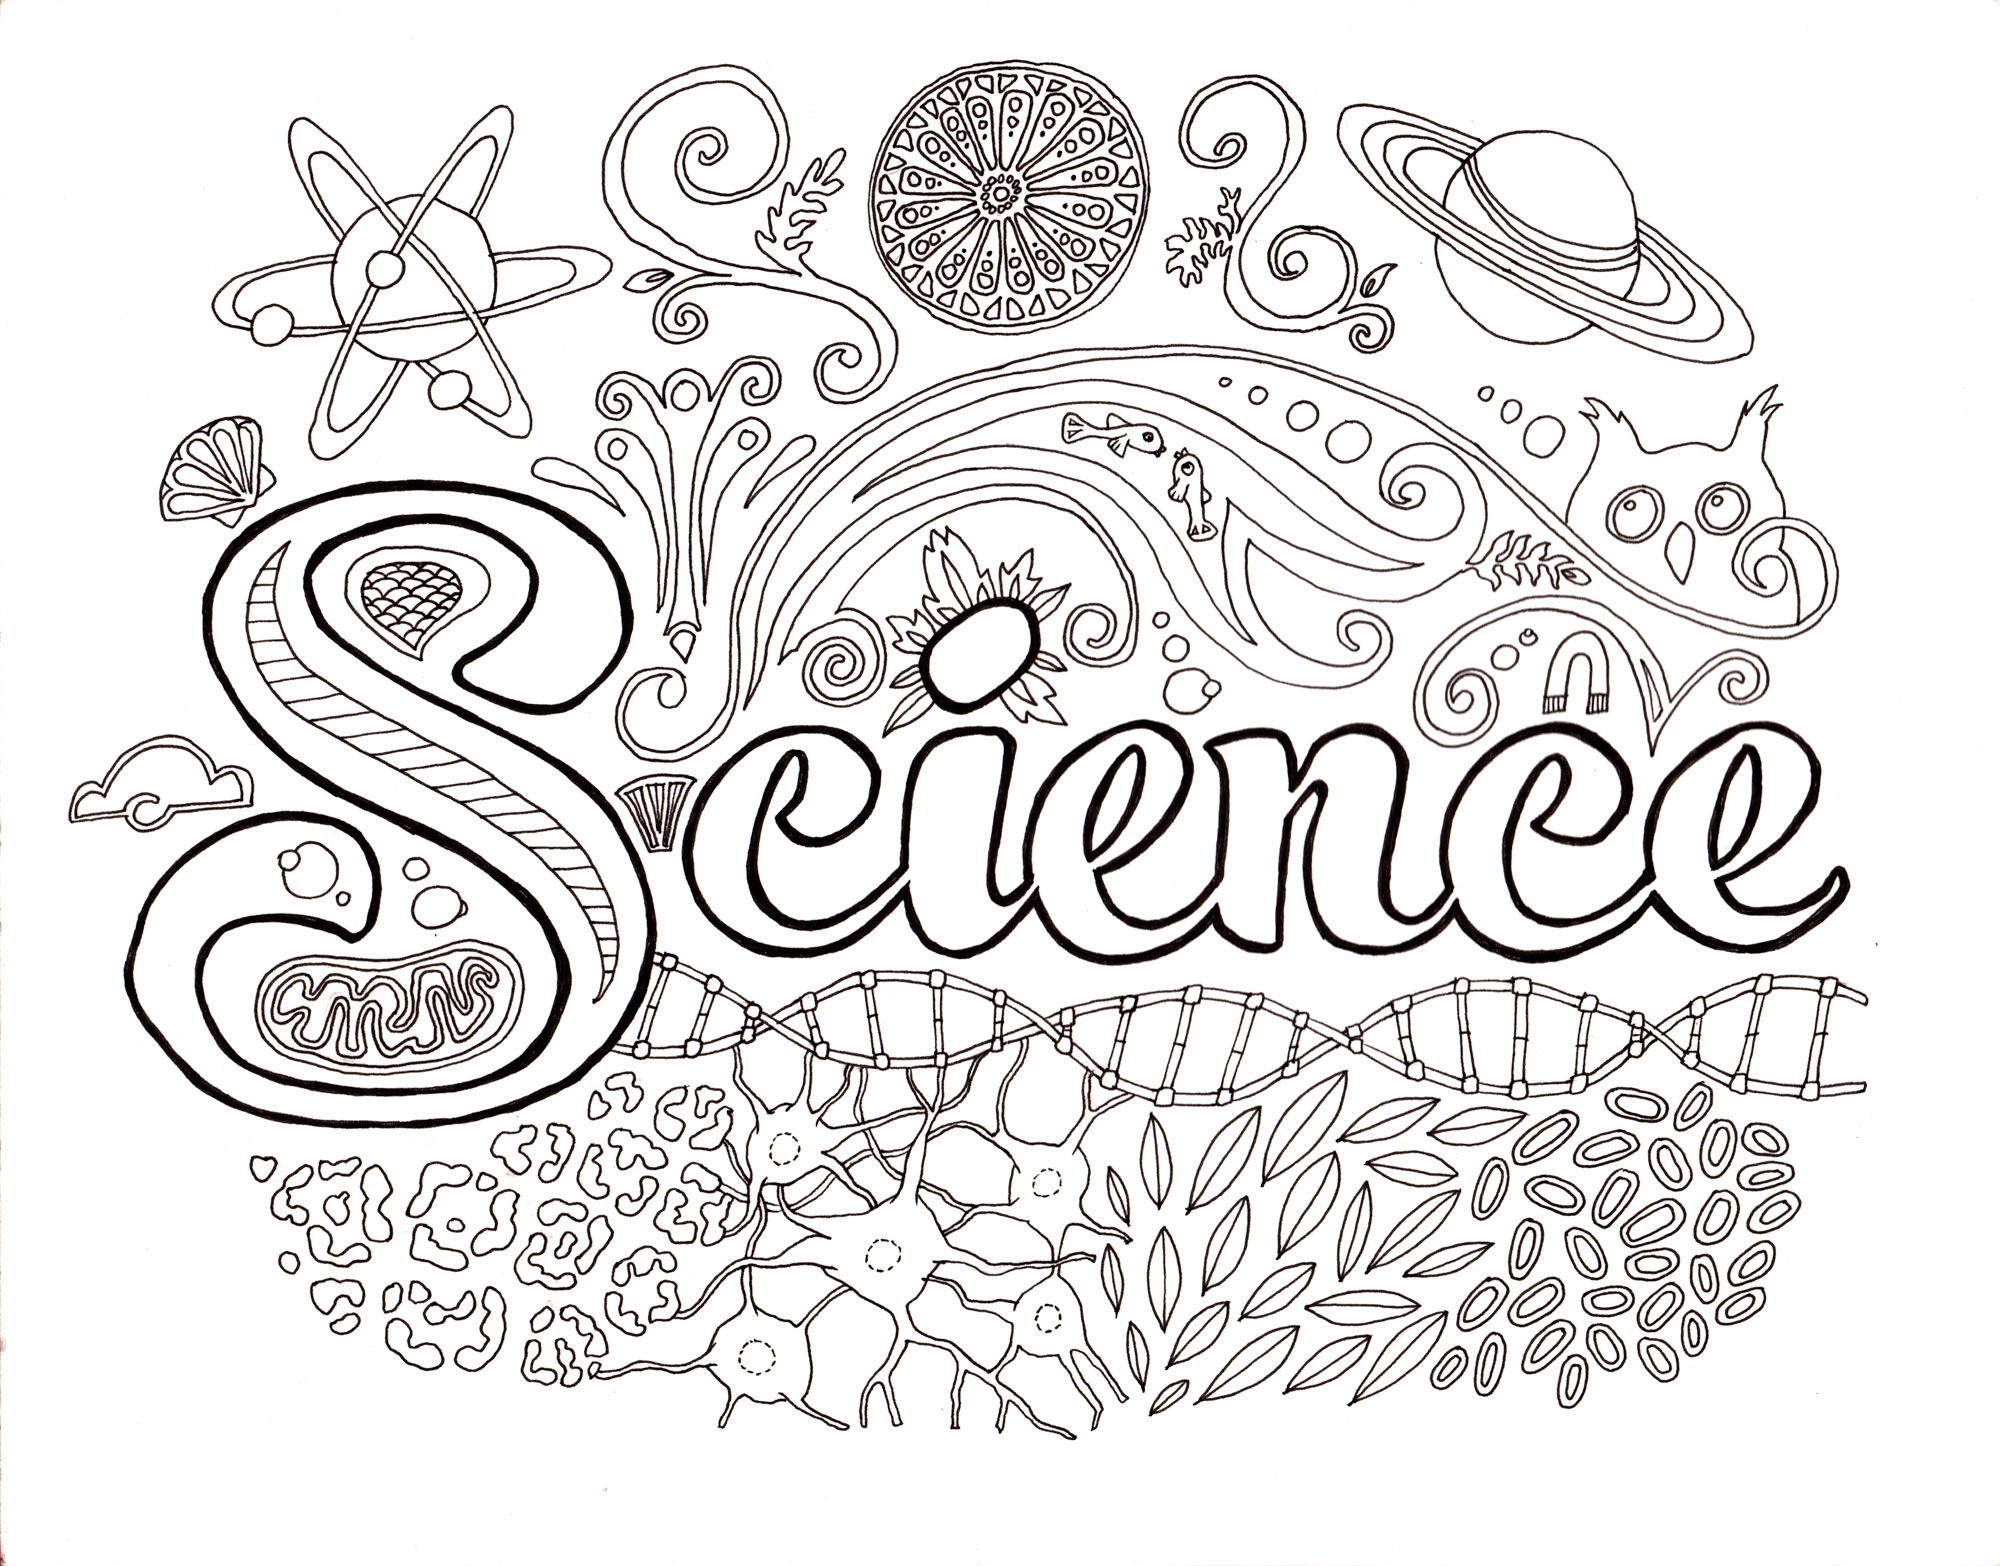 Science coloring pages